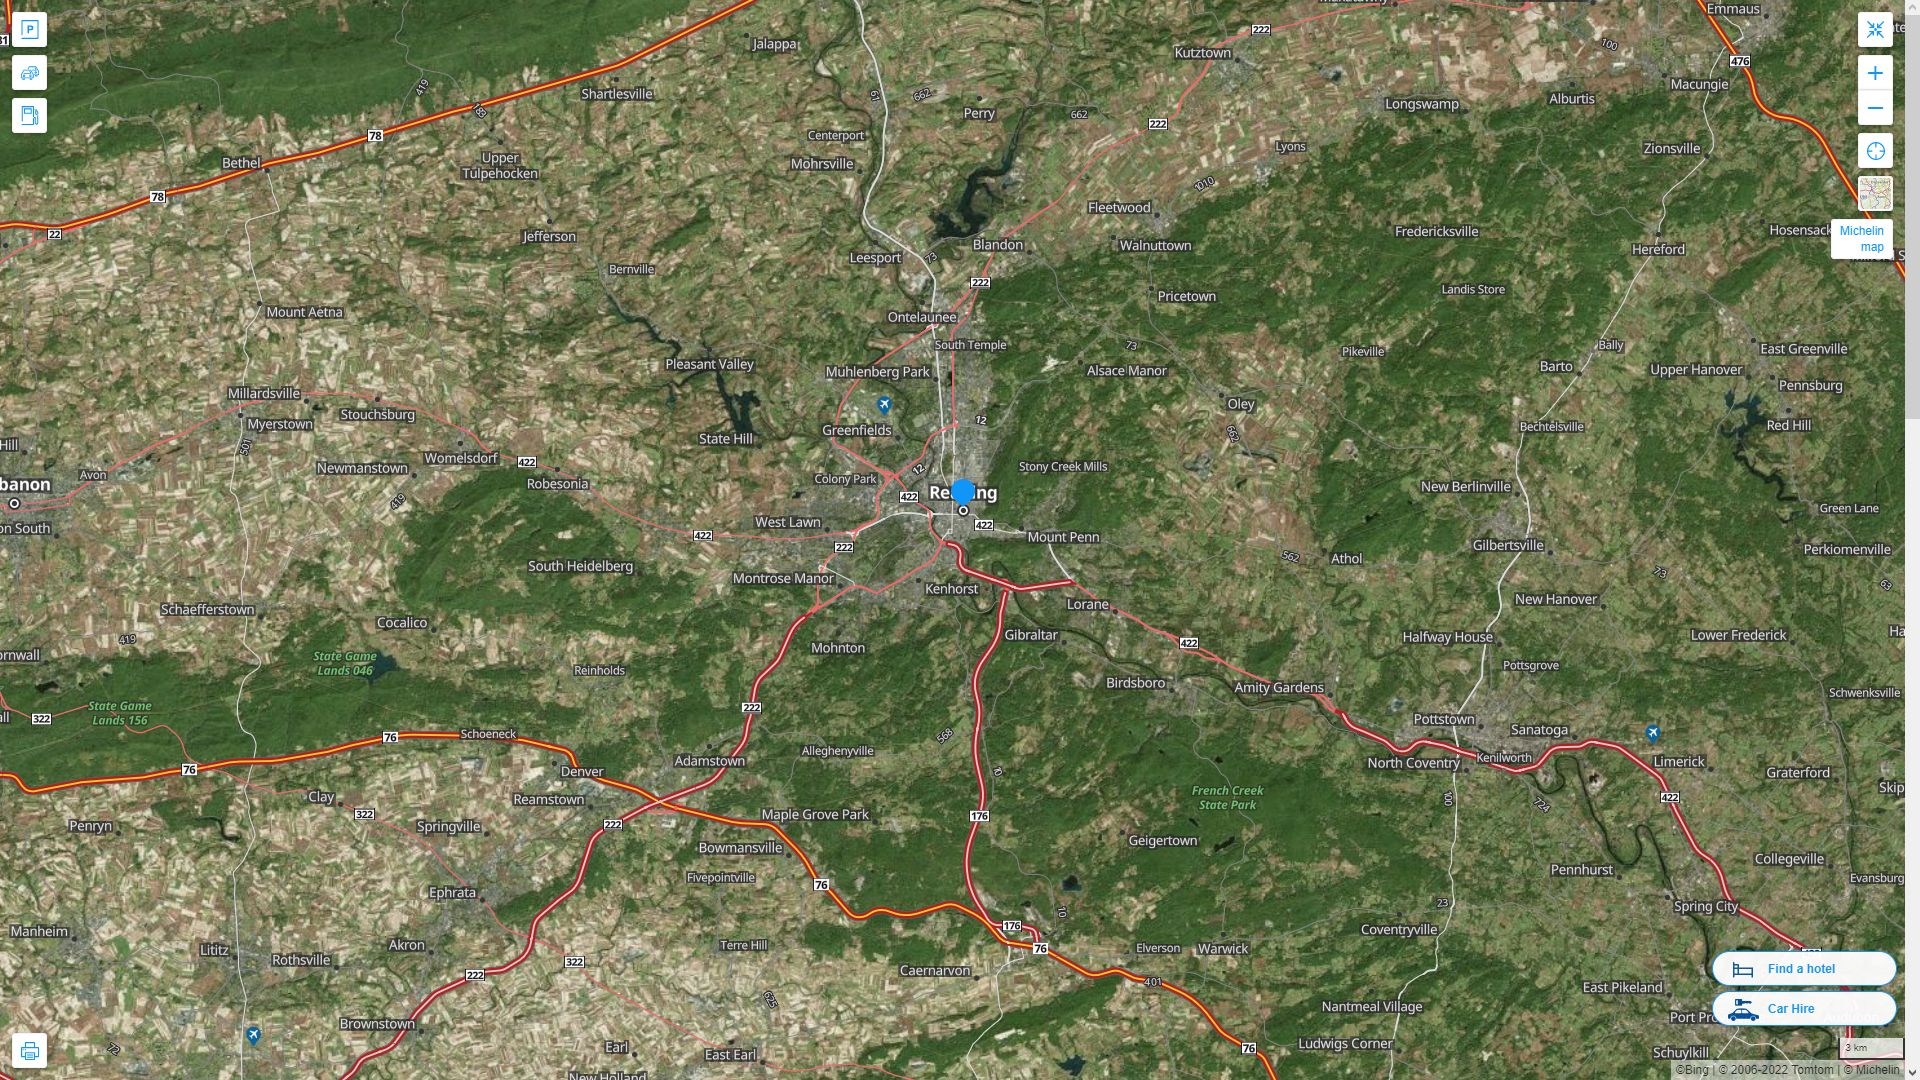 Reading Pennsylvania Highway and Road Map with Satellite View